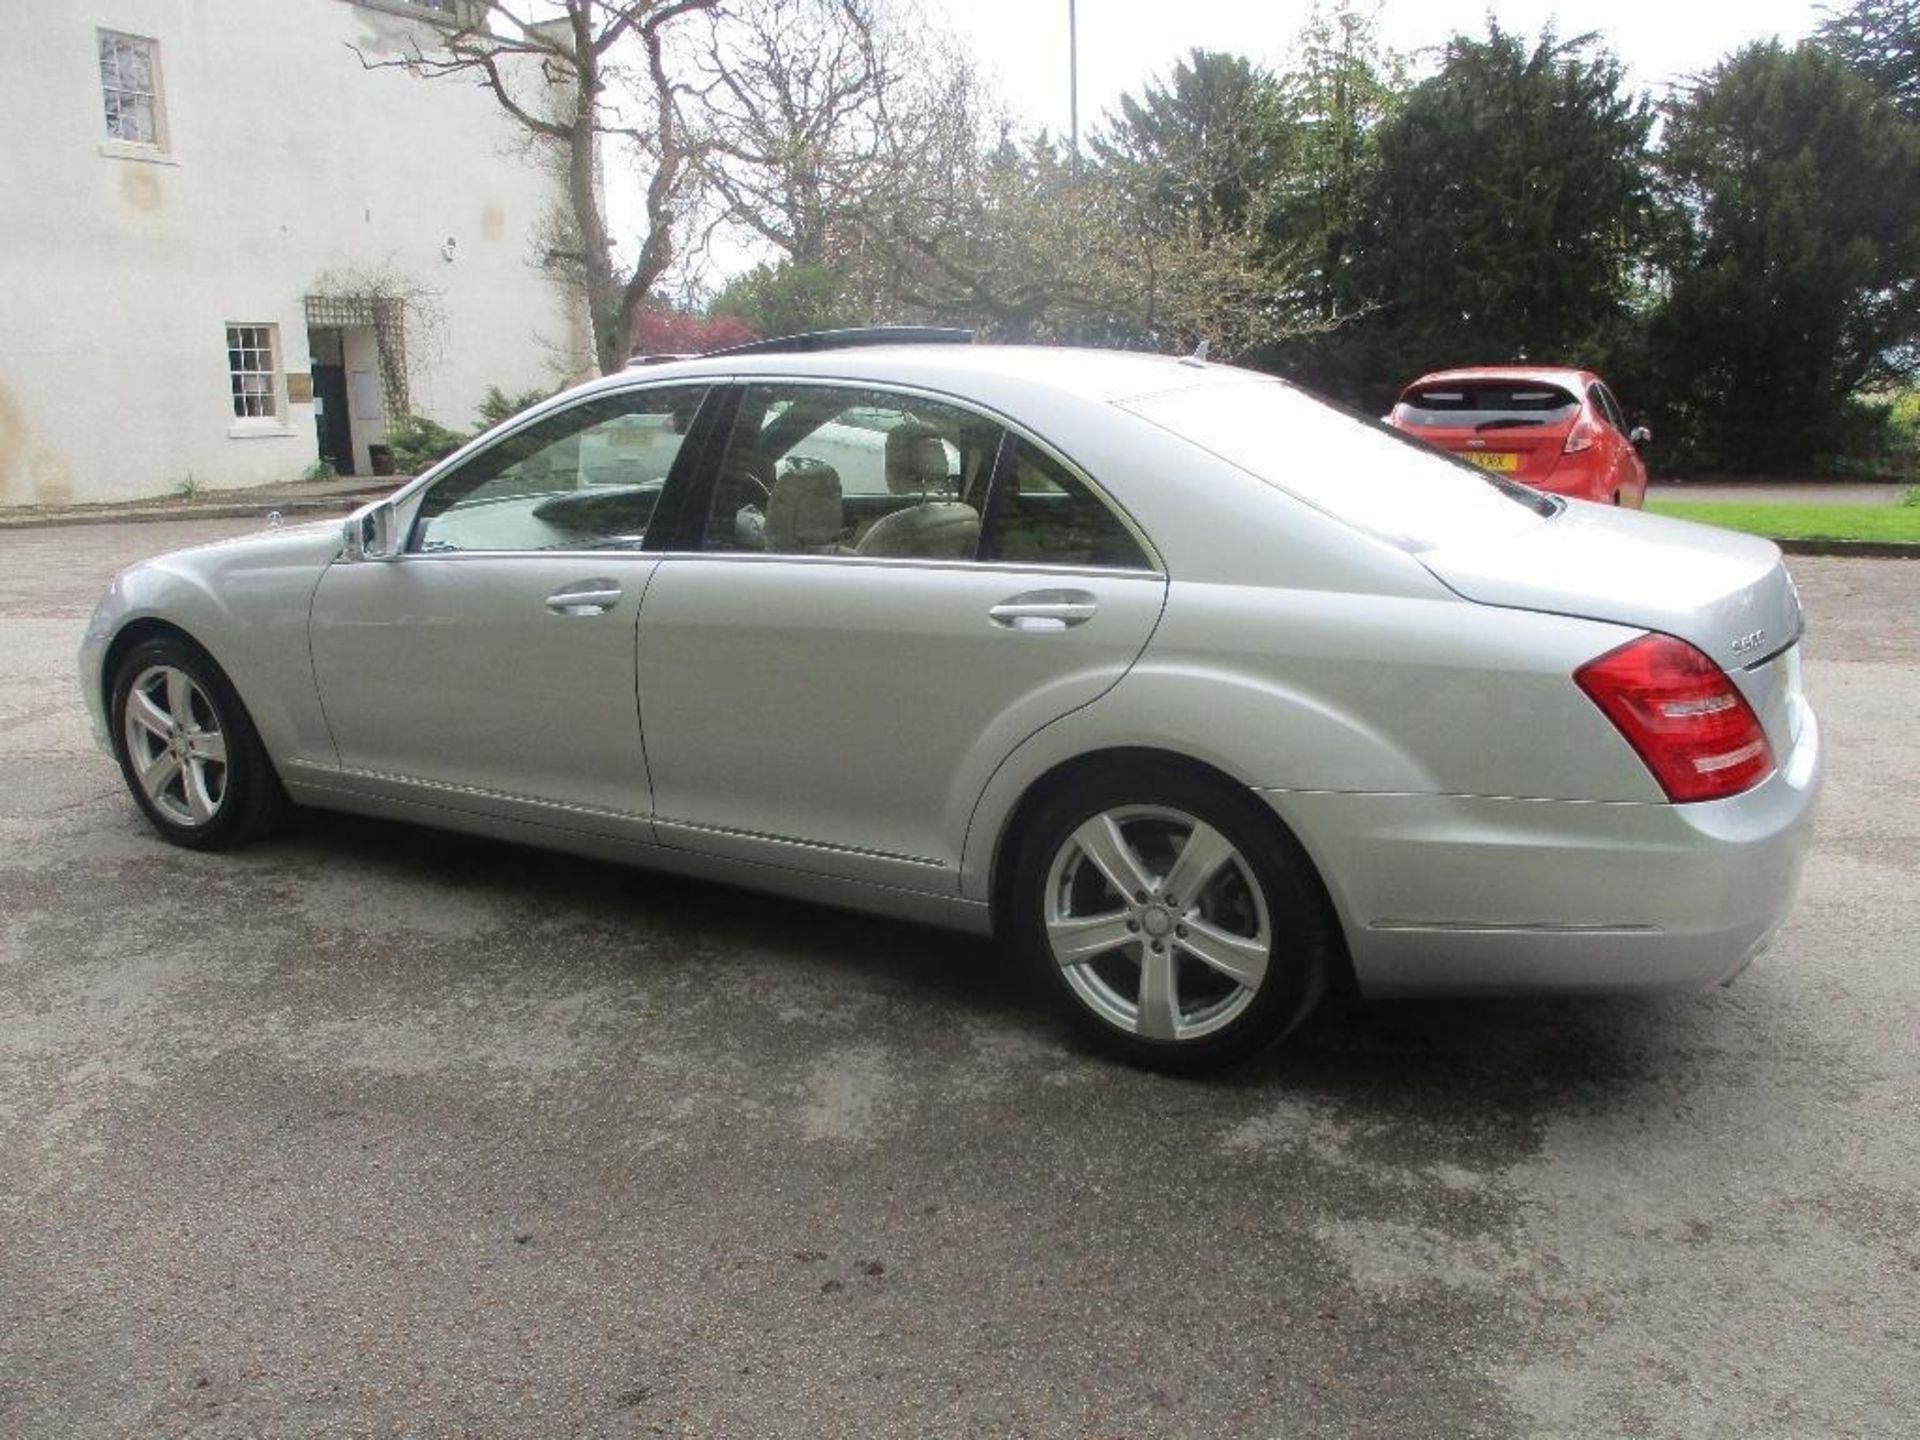 2010/60 REG MERCEDES-BENZ S500 L AUTOMATIC 5.5L PETROL 4 DOOR SALOON, SHOWING 0 FORMER KEEPERS - Image 8 of 9